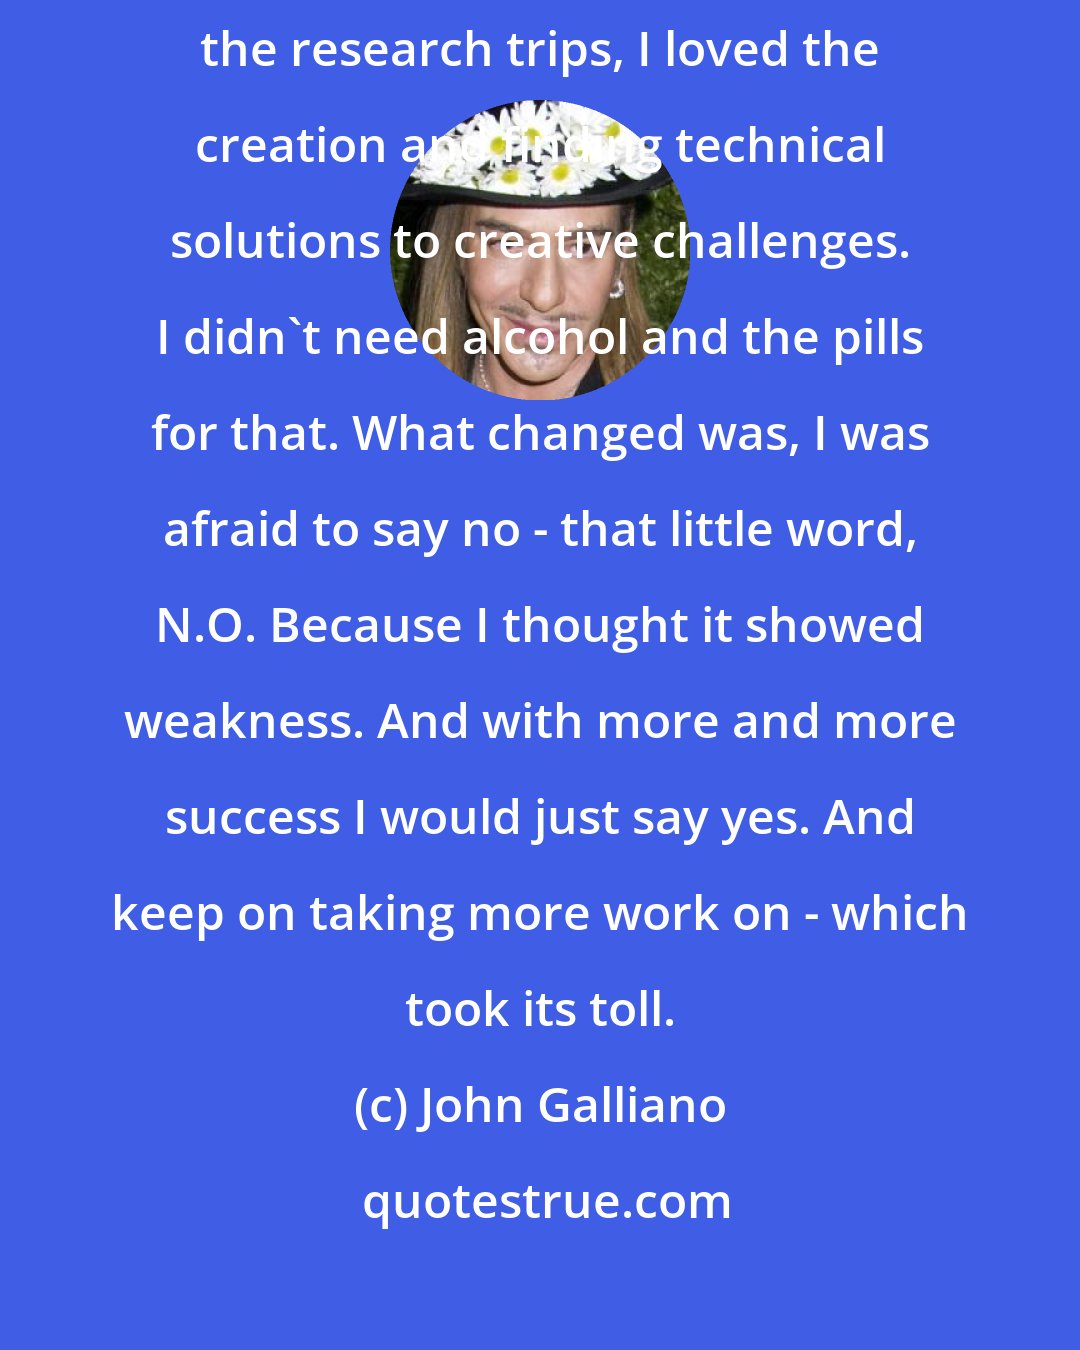 John Galliano: In the early days I was incredibly creative and productive - I loved the research trips, I loved the creation and finding technical solutions to creative challenges. I didn't need alcohol and the pills for that. What changed was, I was afraid to say no - that little word, N.O. Because I thought it showed weakness. And with more and more success I would just say yes. And keep on taking more work on - which took its toll.